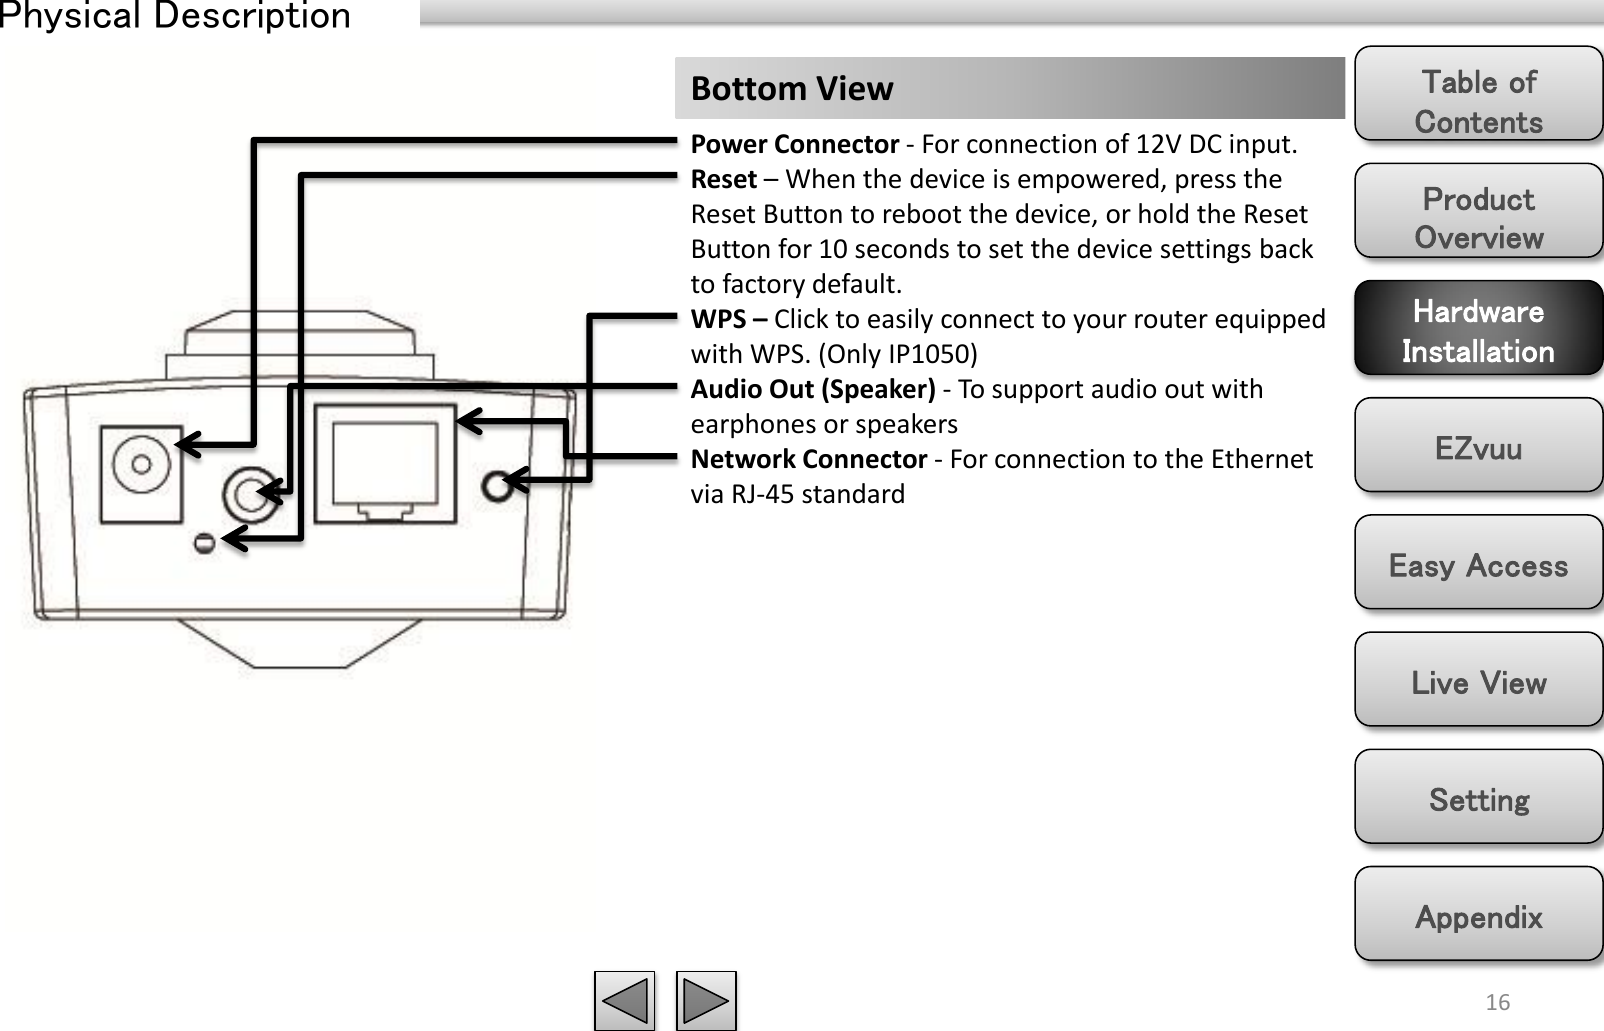 Product Overview Hardware Installation Easy Access EZvuu Setting Live View Appendix Table of Contents 16 Bottom View Power Connector - For connection of 12V DC input. Reset – When the device is empowered, press the Reset Button to reboot the device, or hold the Reset Button for 10 seconds to set the device settings back to factory default. WPS – Click to easily connect to your router equipped with WPS. (Only IP1050) Audio Out (Speaker) - To support audio out with earphones or speakers Network Connector - For connection to the Ethernet via RJ-45 standard Physical Description 